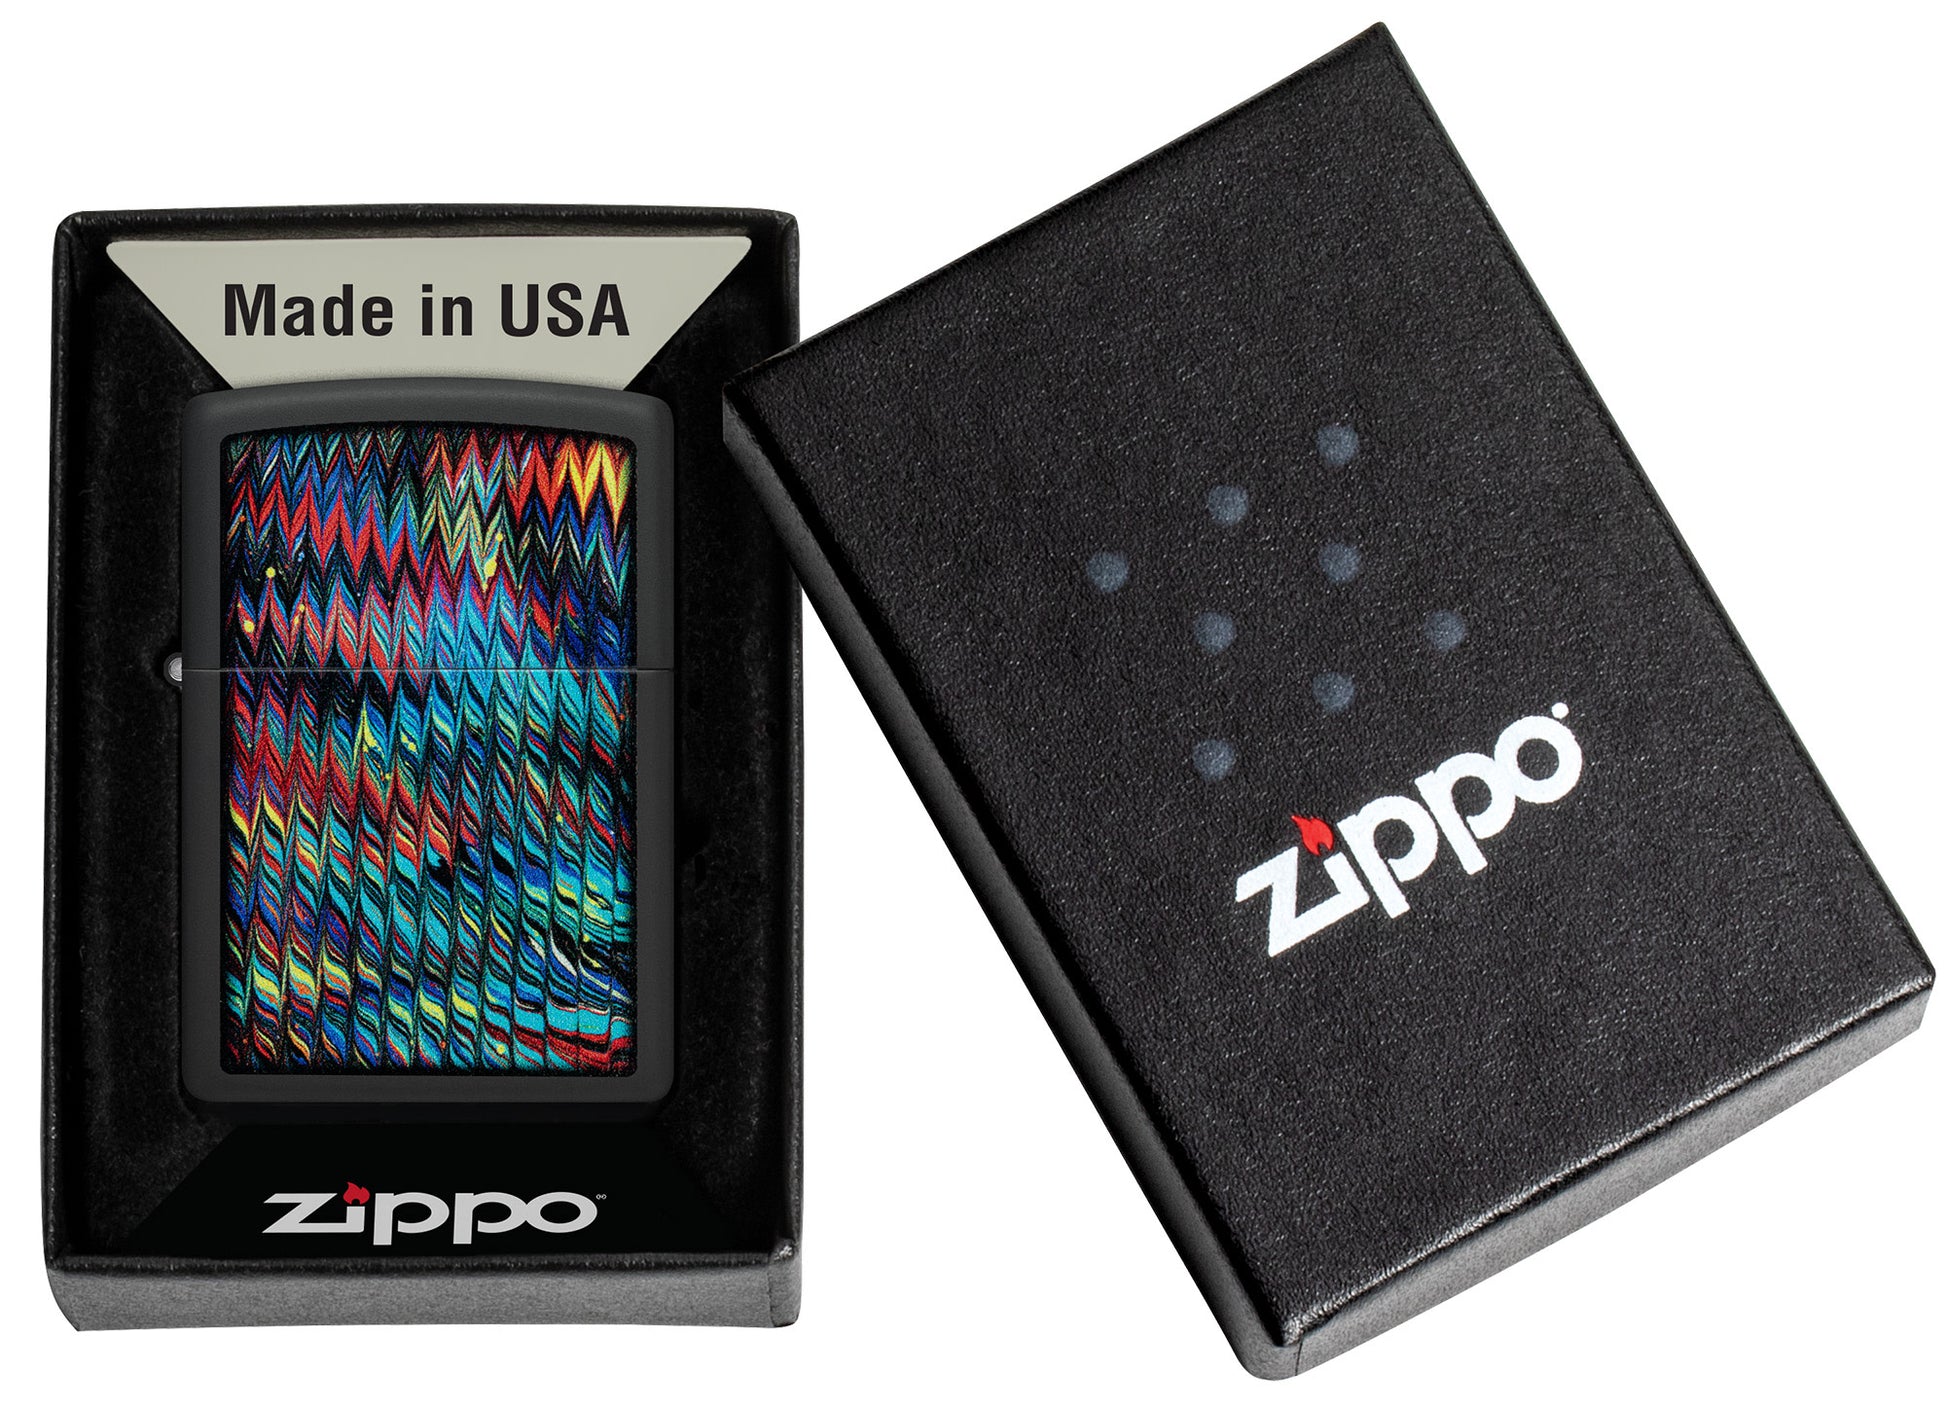 Zippo Paint Pour Design Black Matte Windproof Lighter in its packaging.